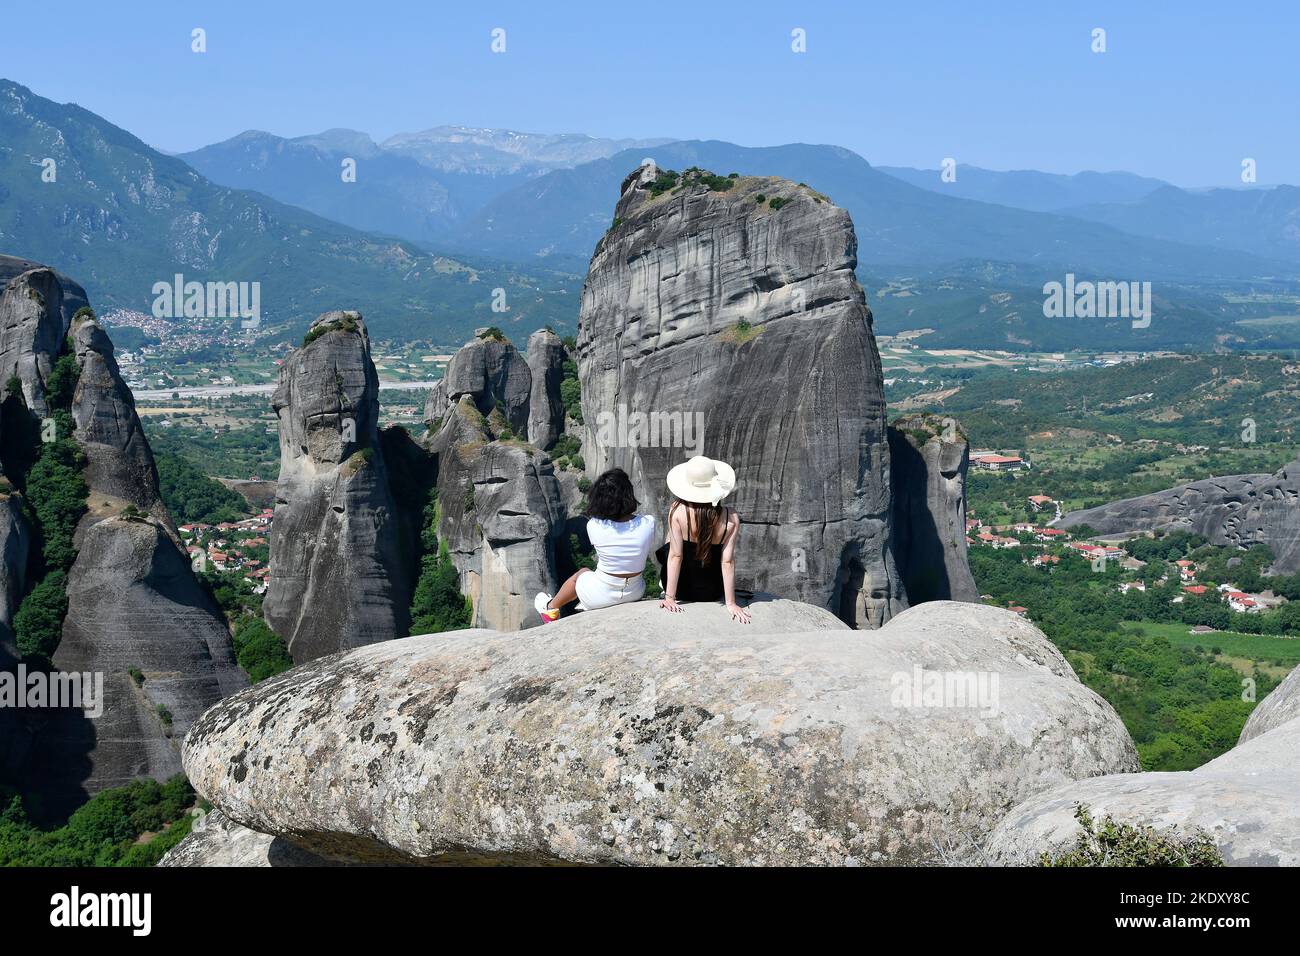 Greece, two unidentified woman enjoy a view over the great scenery of Meteora Rocks in the UNESCO World Heritage site in Thessaly Stock Photo